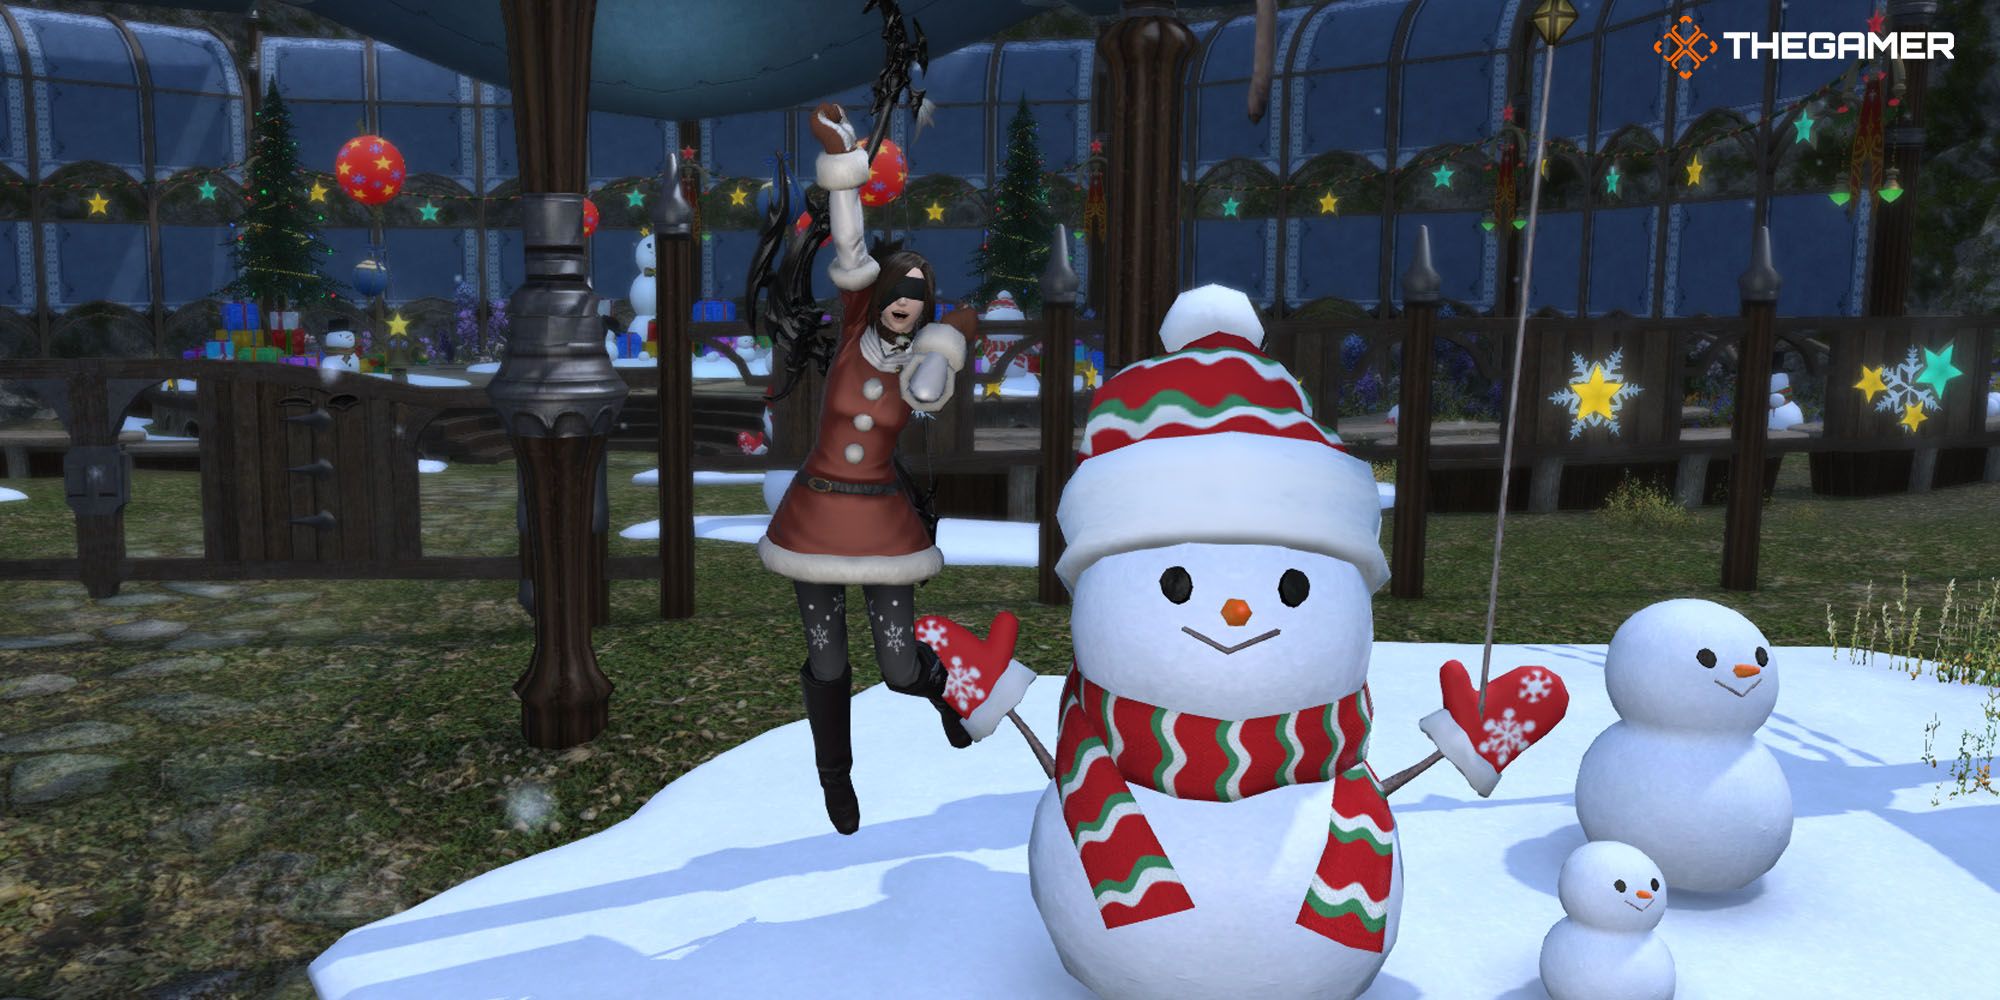 Final Fantasy 14 Captured The Magic Of Christmas When Nothing Else Could